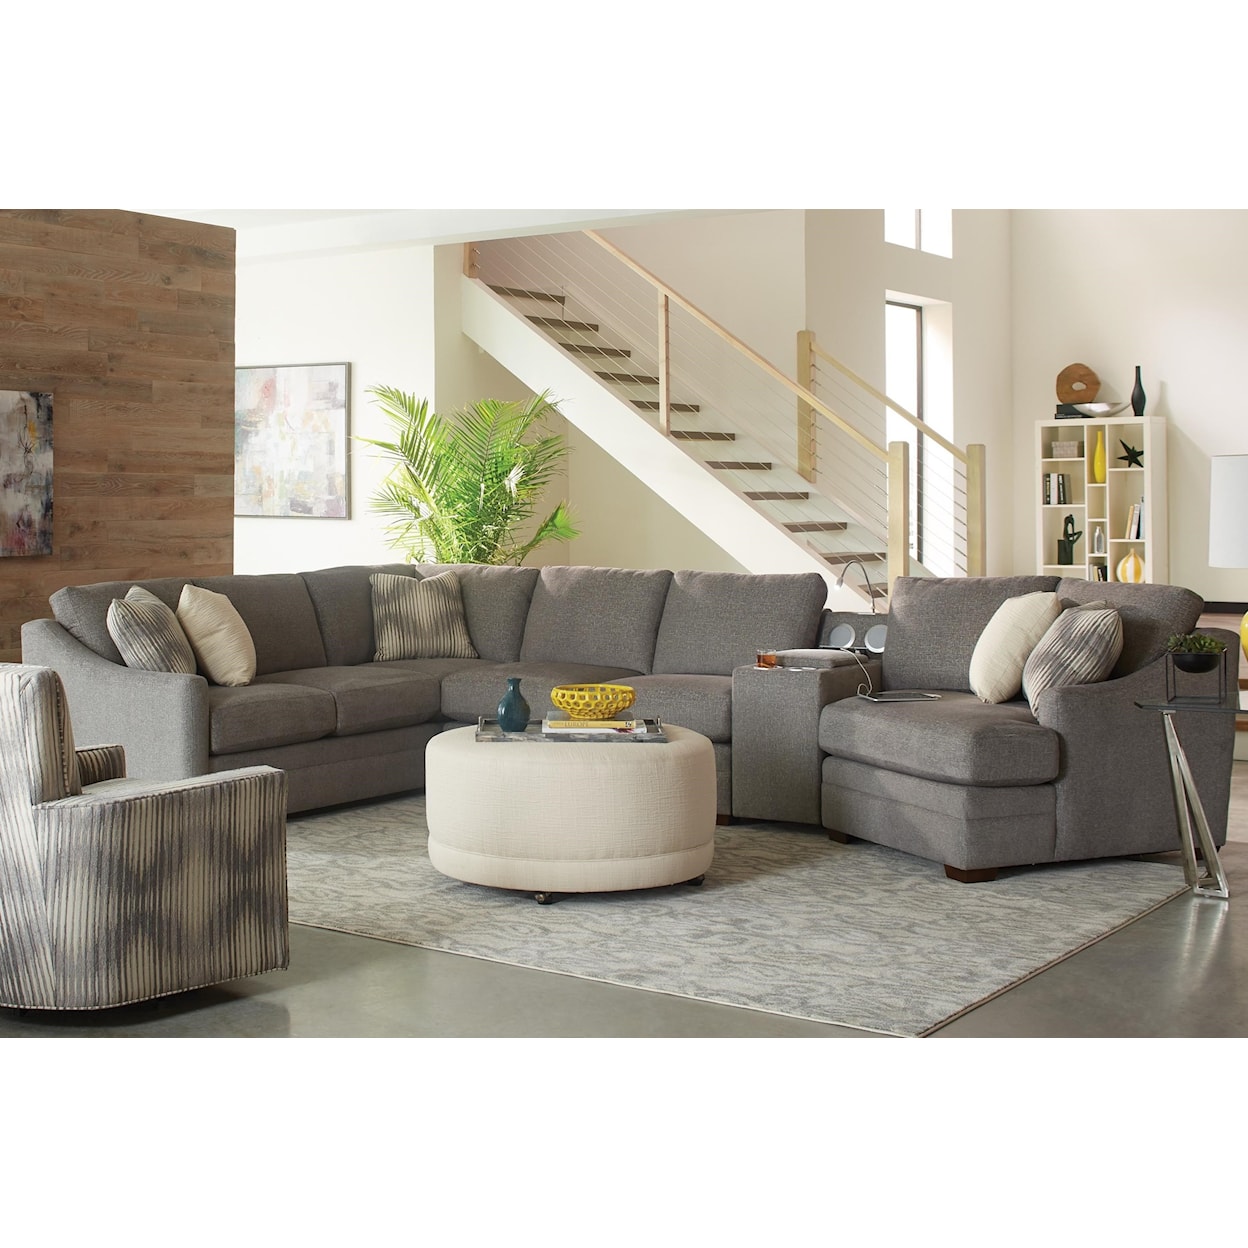 Craftmaster F9 Series 4 pc Sectional Sofa w/ Power Console